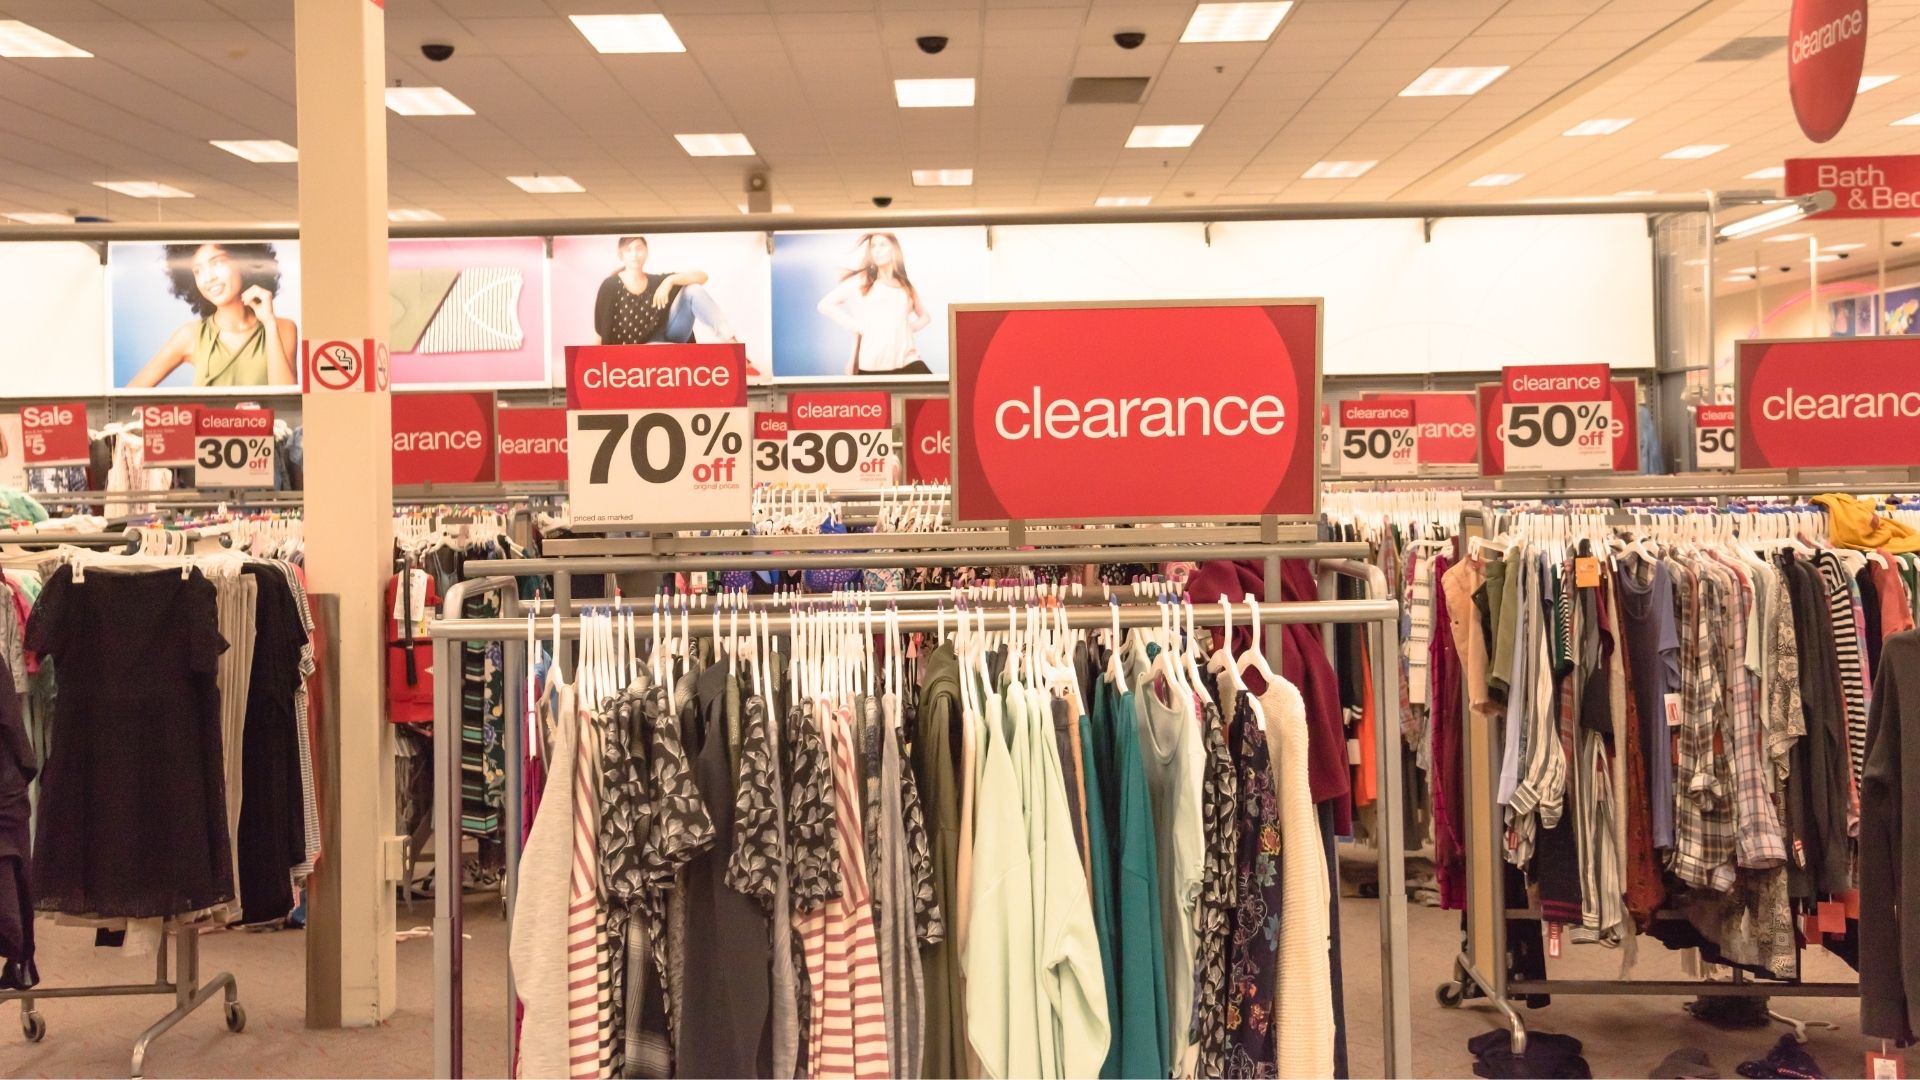 TheGlobalDisplaySolutions 69669 Clearance Sections Retail Image1 